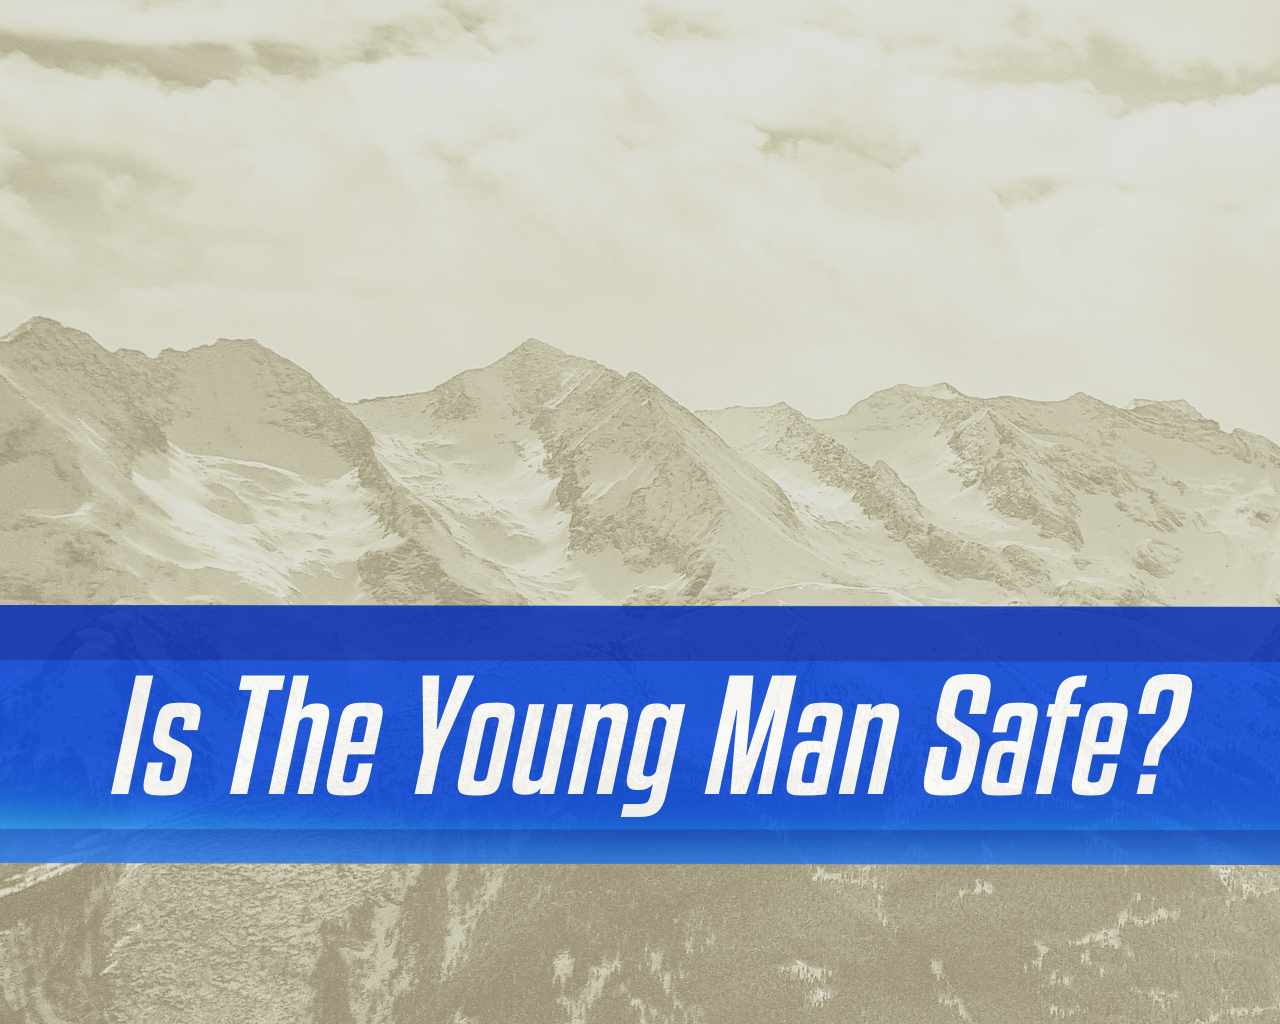 Is the young man safe?